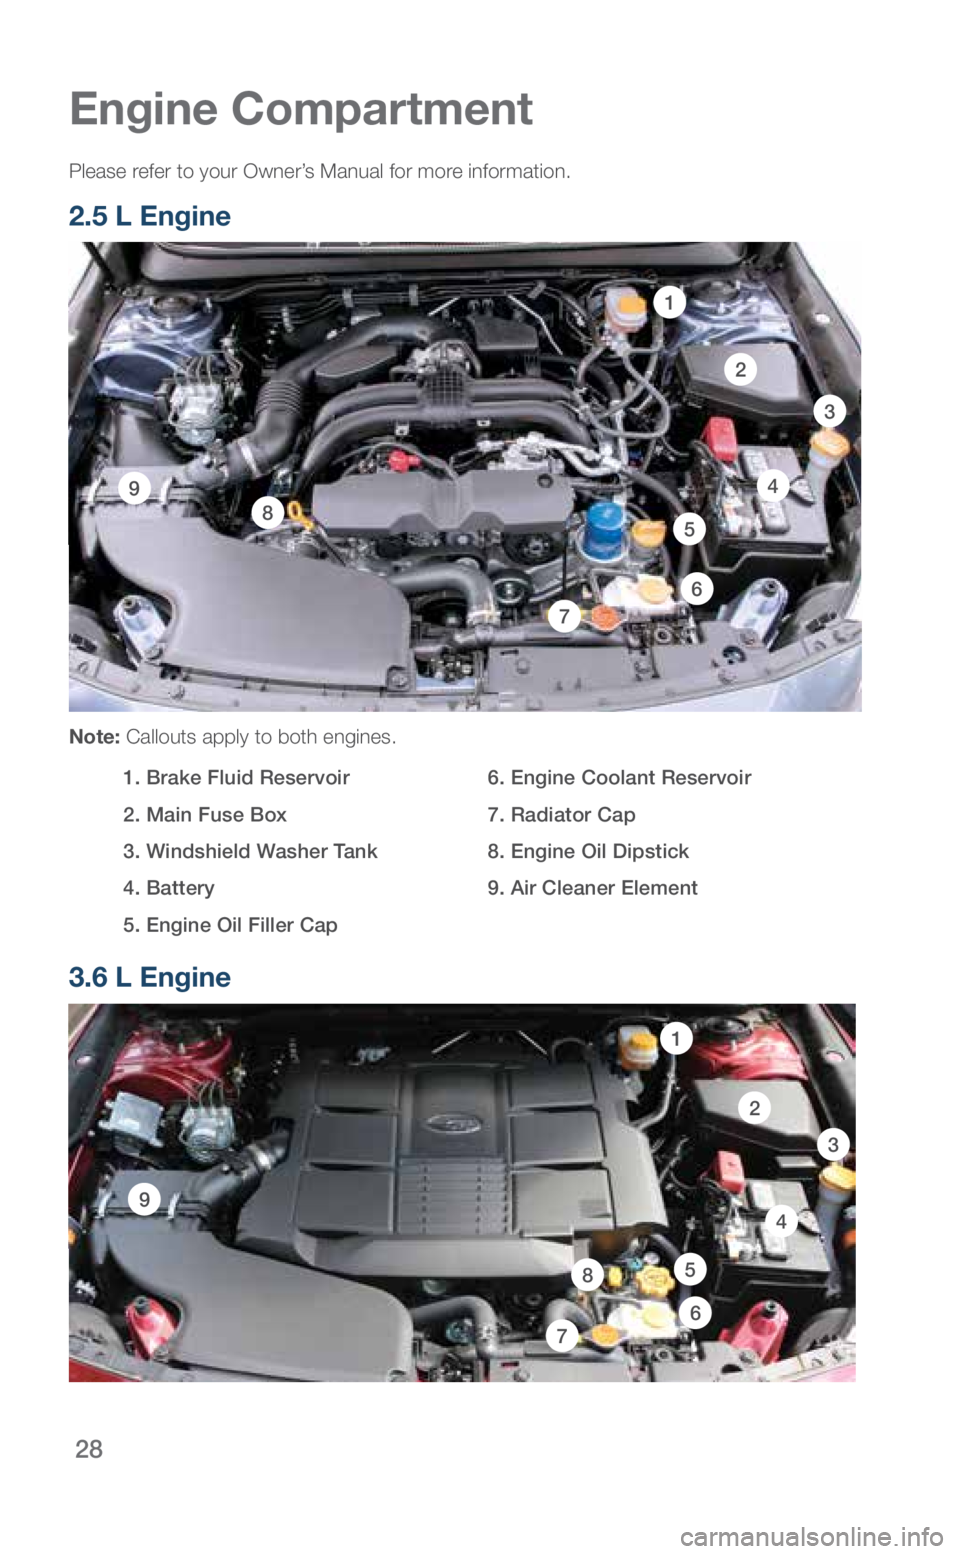 SUBARU OUTBACK 2018  Quick Guide 28
2
3
7
1
85
49
6
Engine Compartment
Please refer to your Owner’s Manual for more information. 
2.5 L Engine
 
Note: Callouts apply to both engines.
 1.  Brake Fluid Reservoir
  2. Main Fuse Box 
 